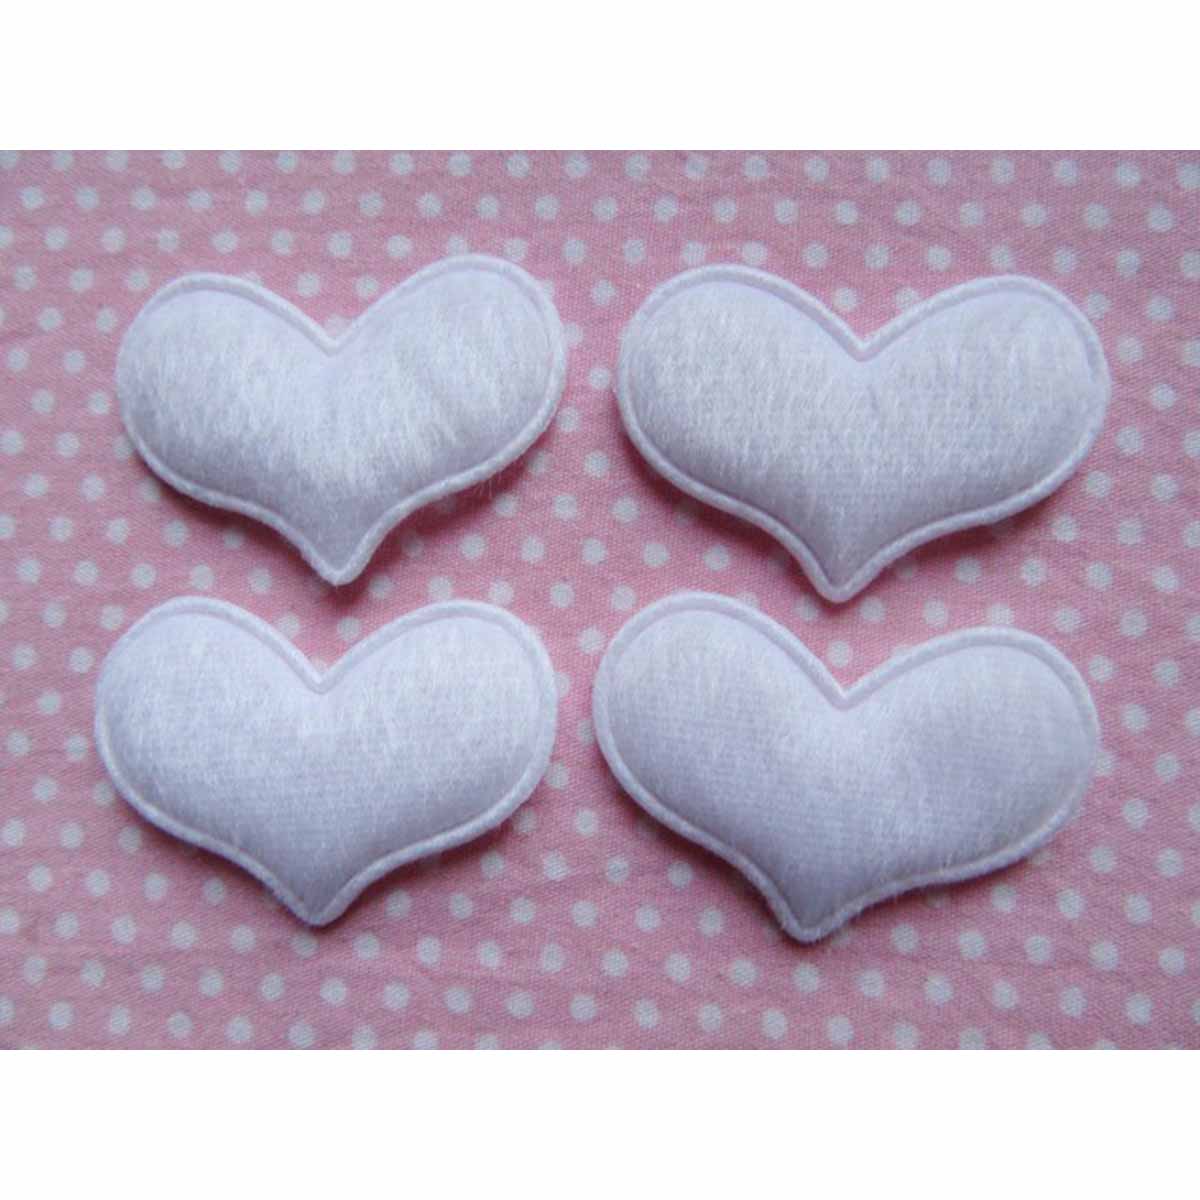 120 Padded Furry Heart 1 5/8″ Appliques-White